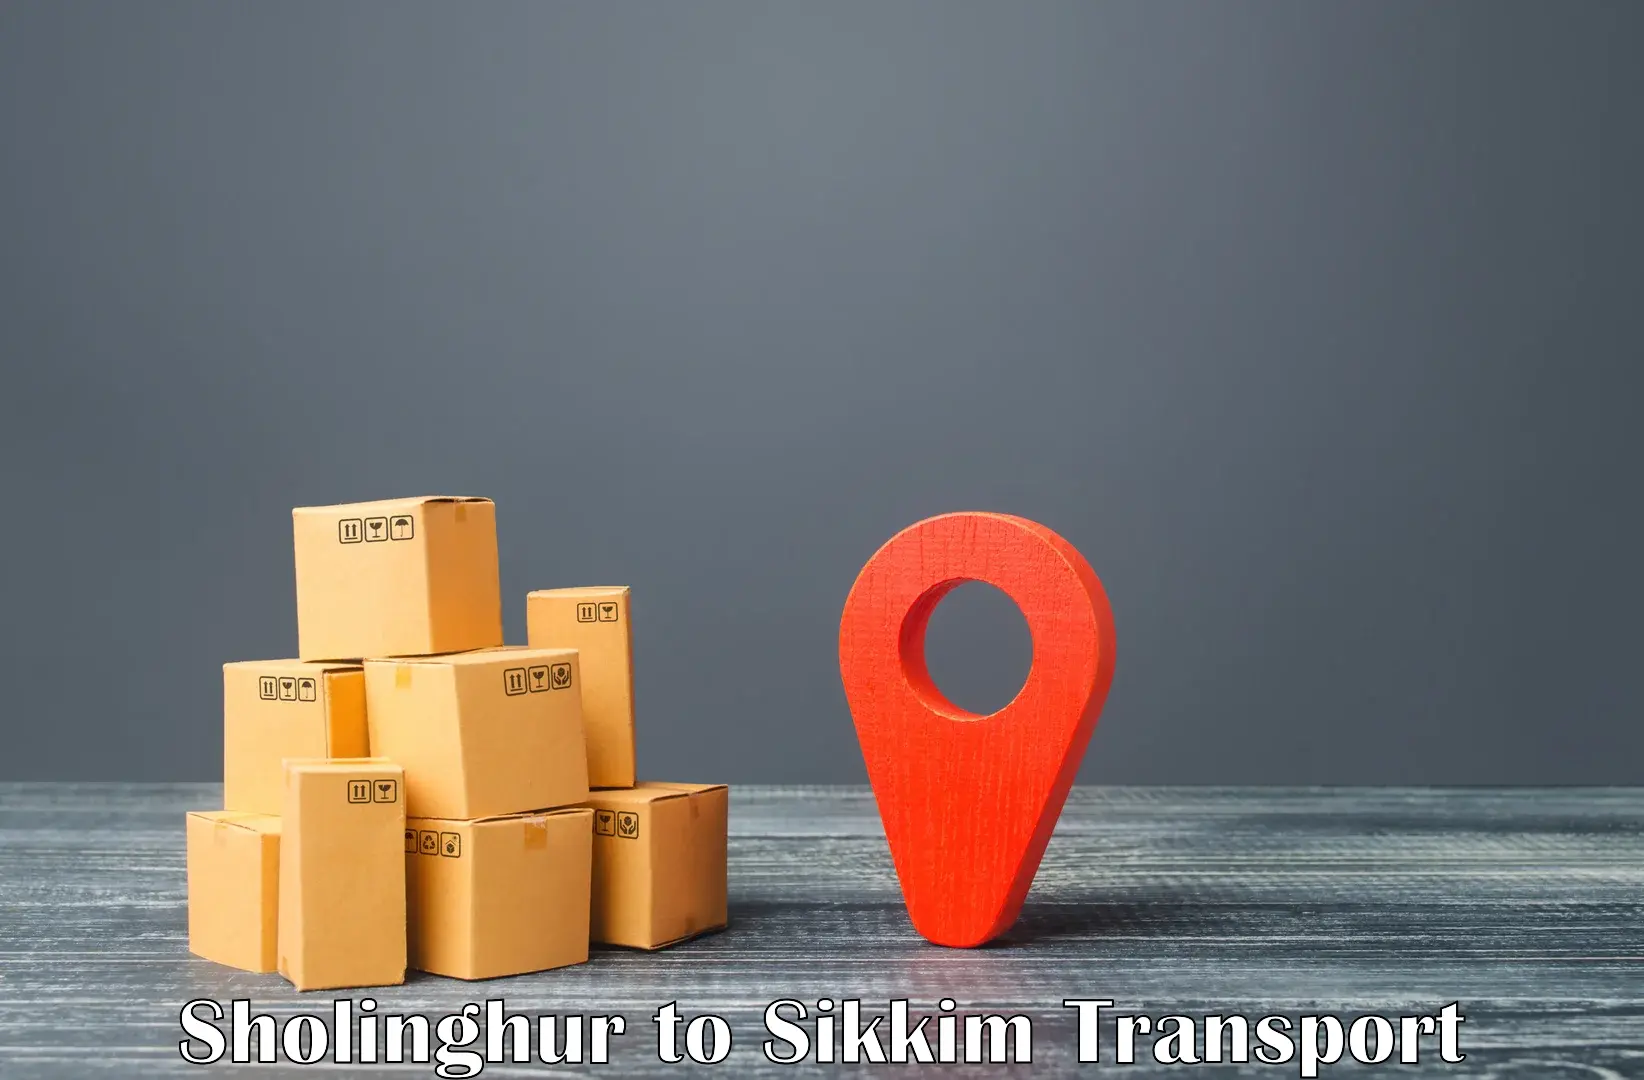 Nearby transport service Sholinghur to Pelling